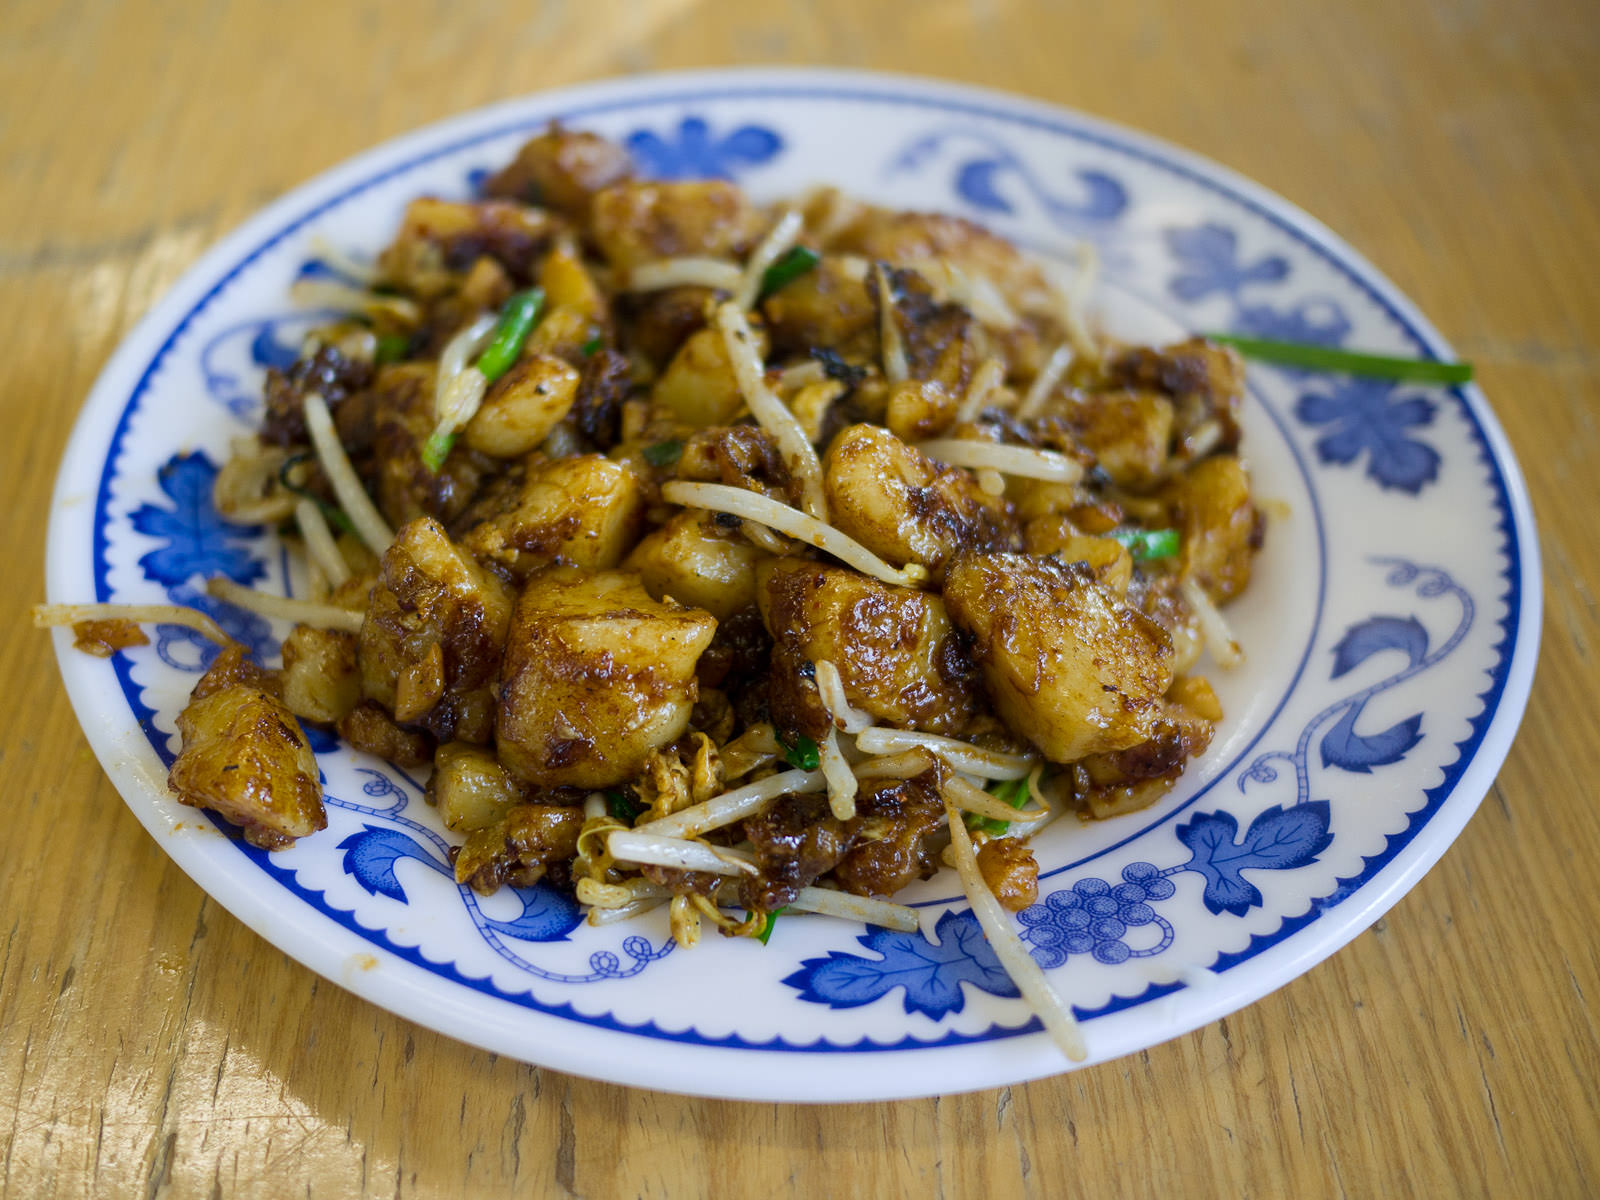 Weekend special - chai tow kway